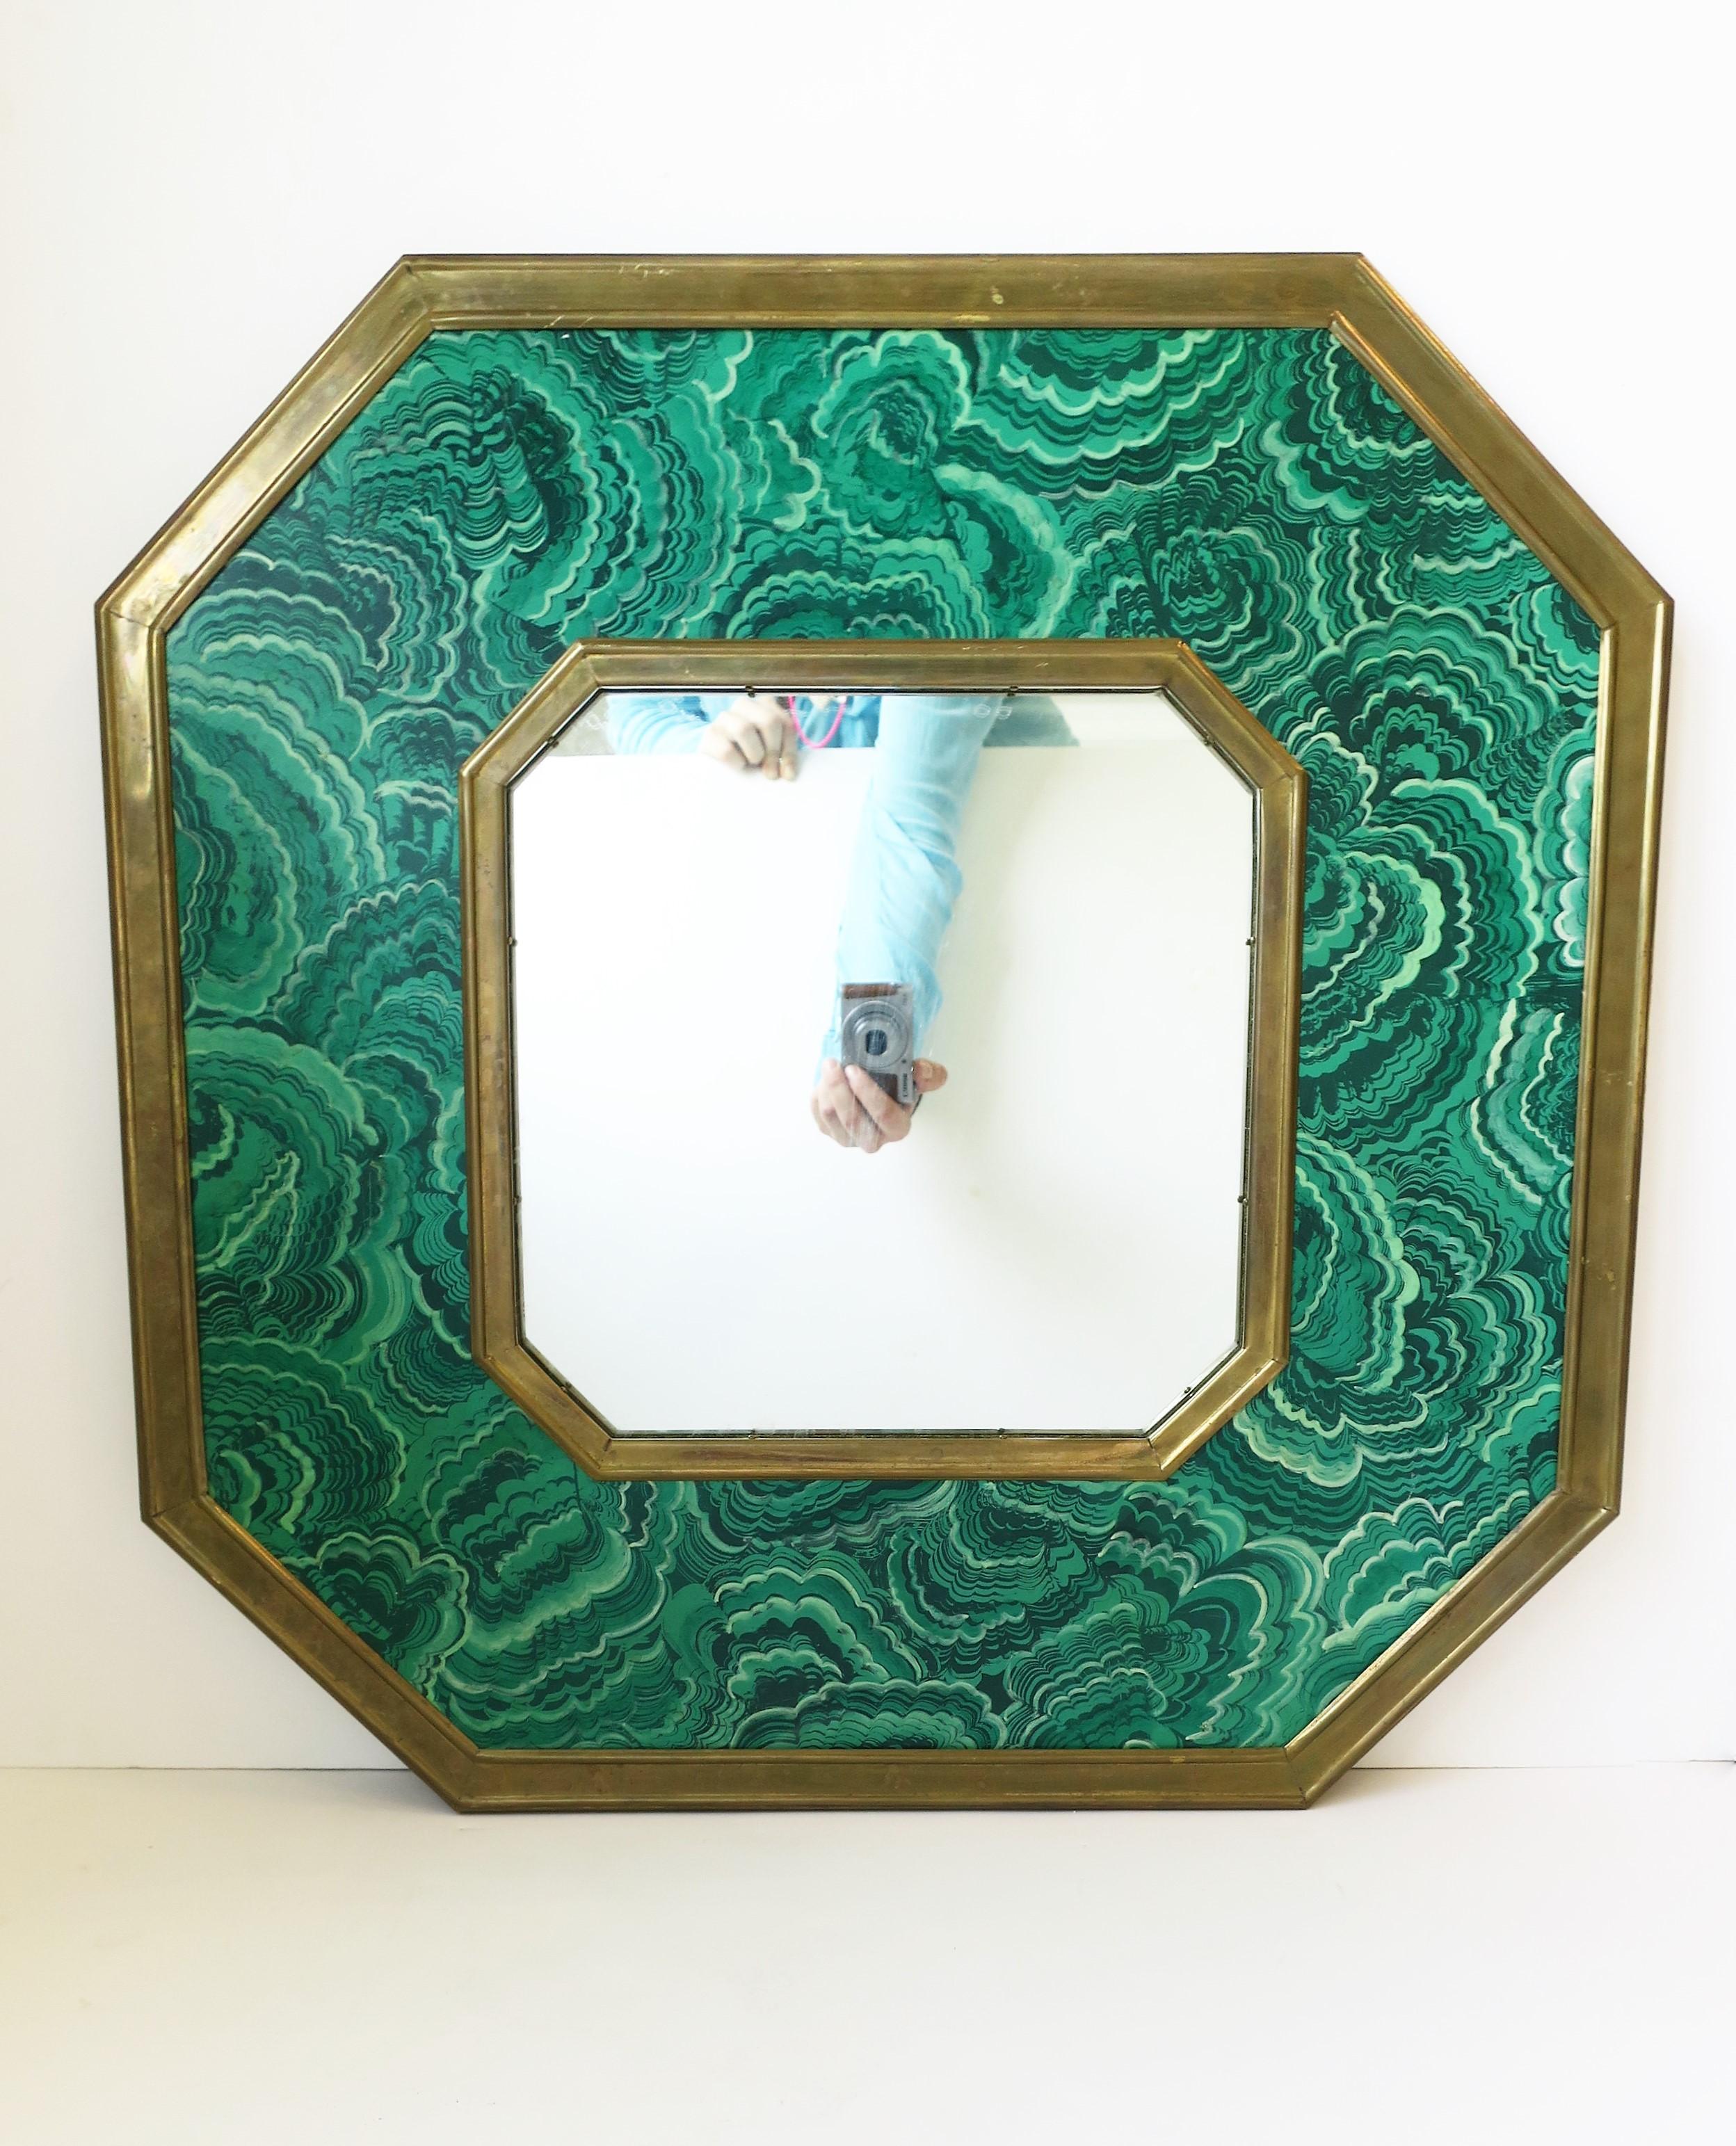 A beautiful Italian brass and green malachite resin octagonal mirror designed by Sarried Ltd., circa 1970s, Italy. Mirror has a brass and green malachite resin frame in an octagonal shape (a nice alternative to round.) With authentication maker's